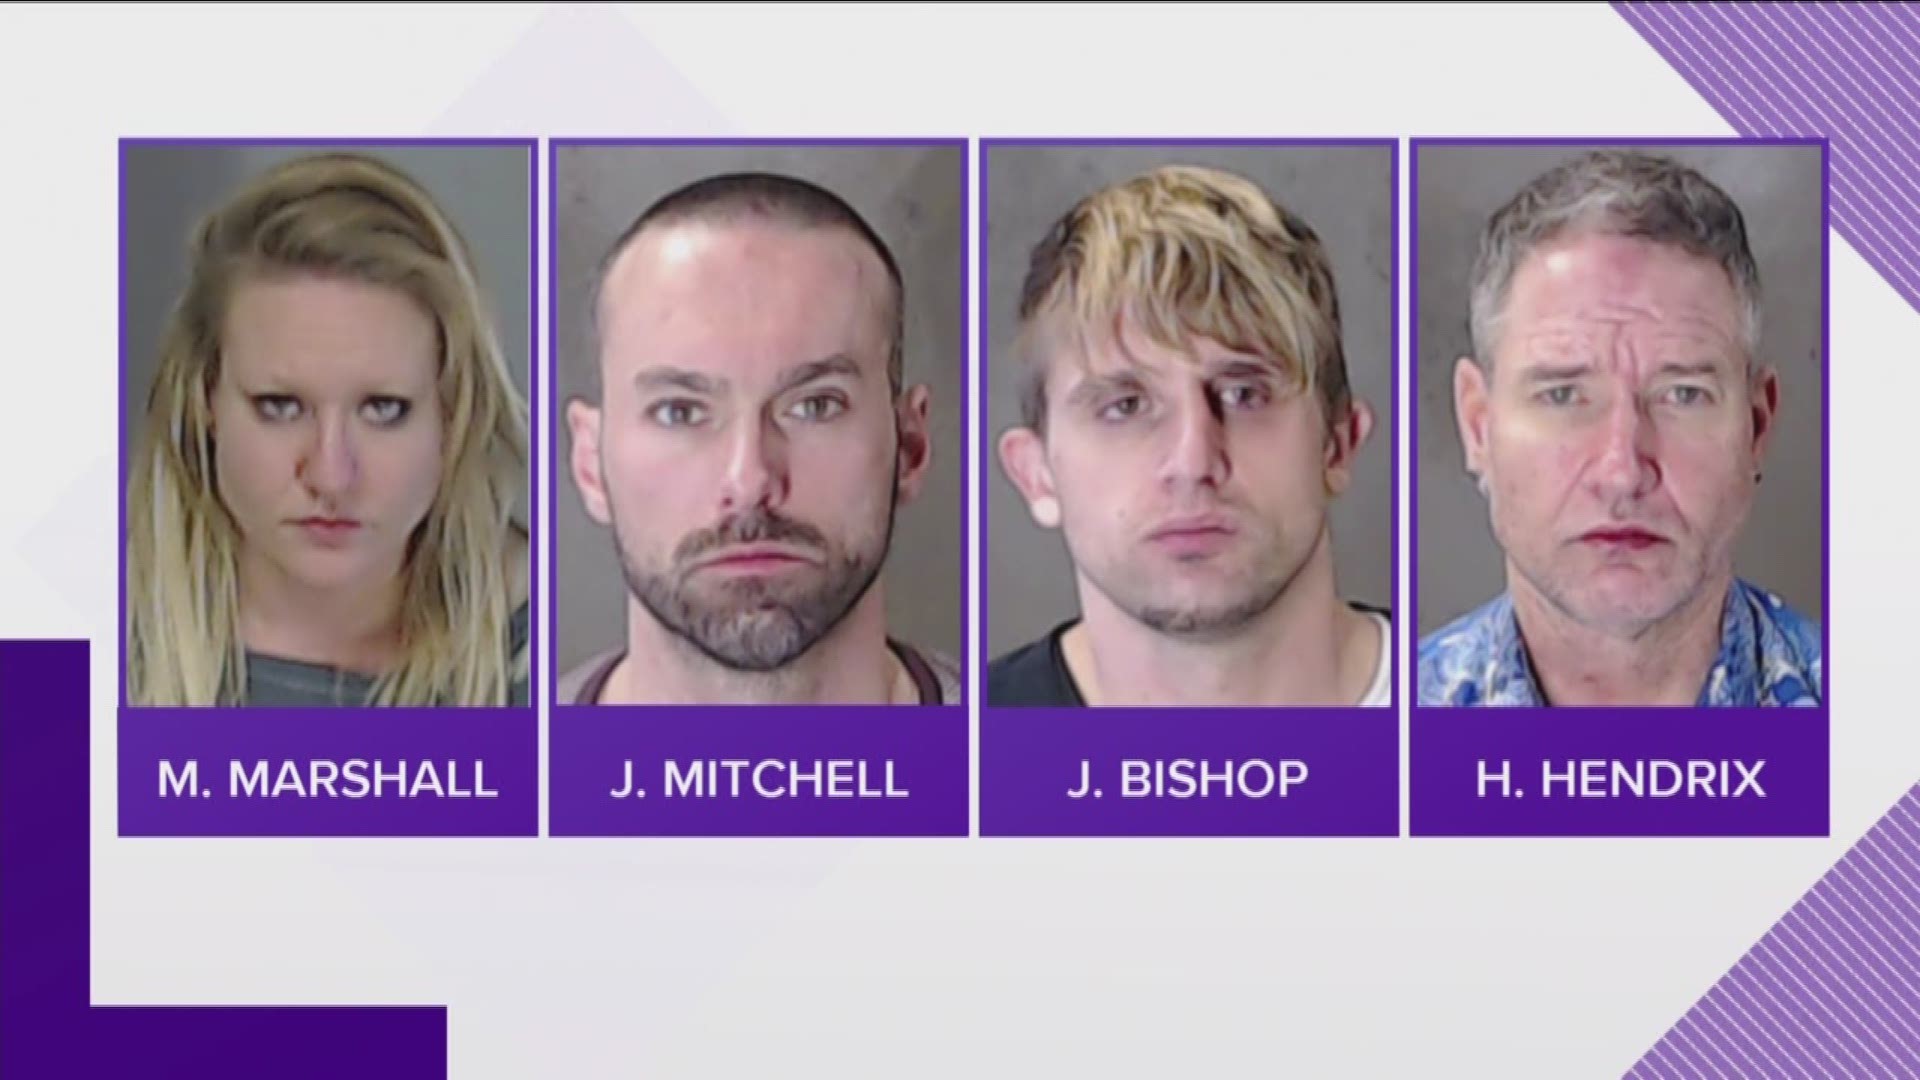 All four suspects are charged with possession of meth.